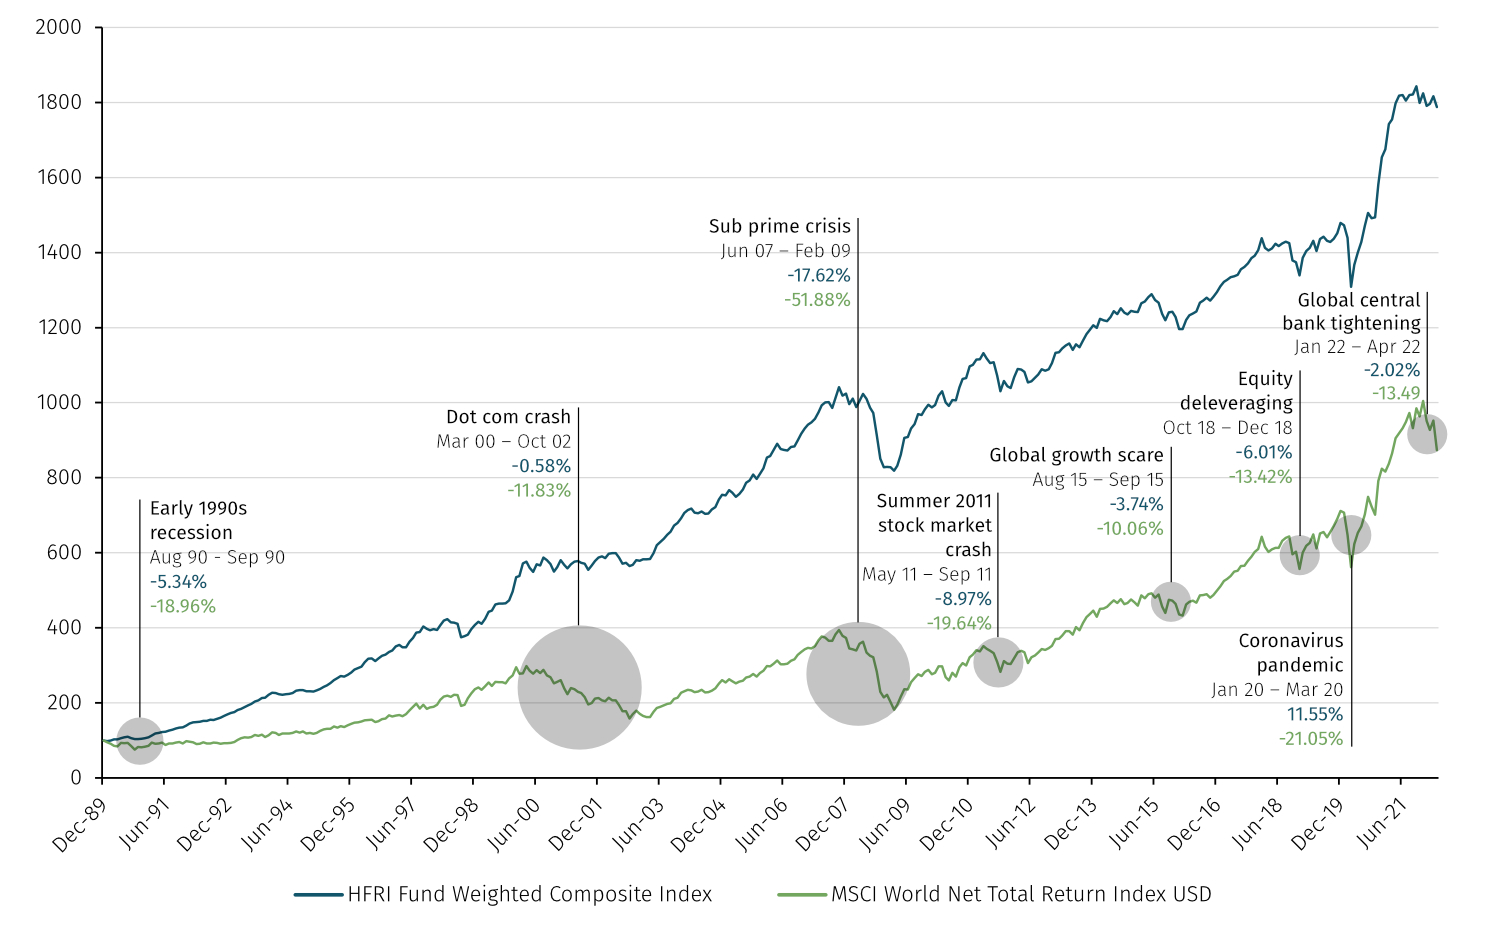 graph showing hedge fund performance during market stress events